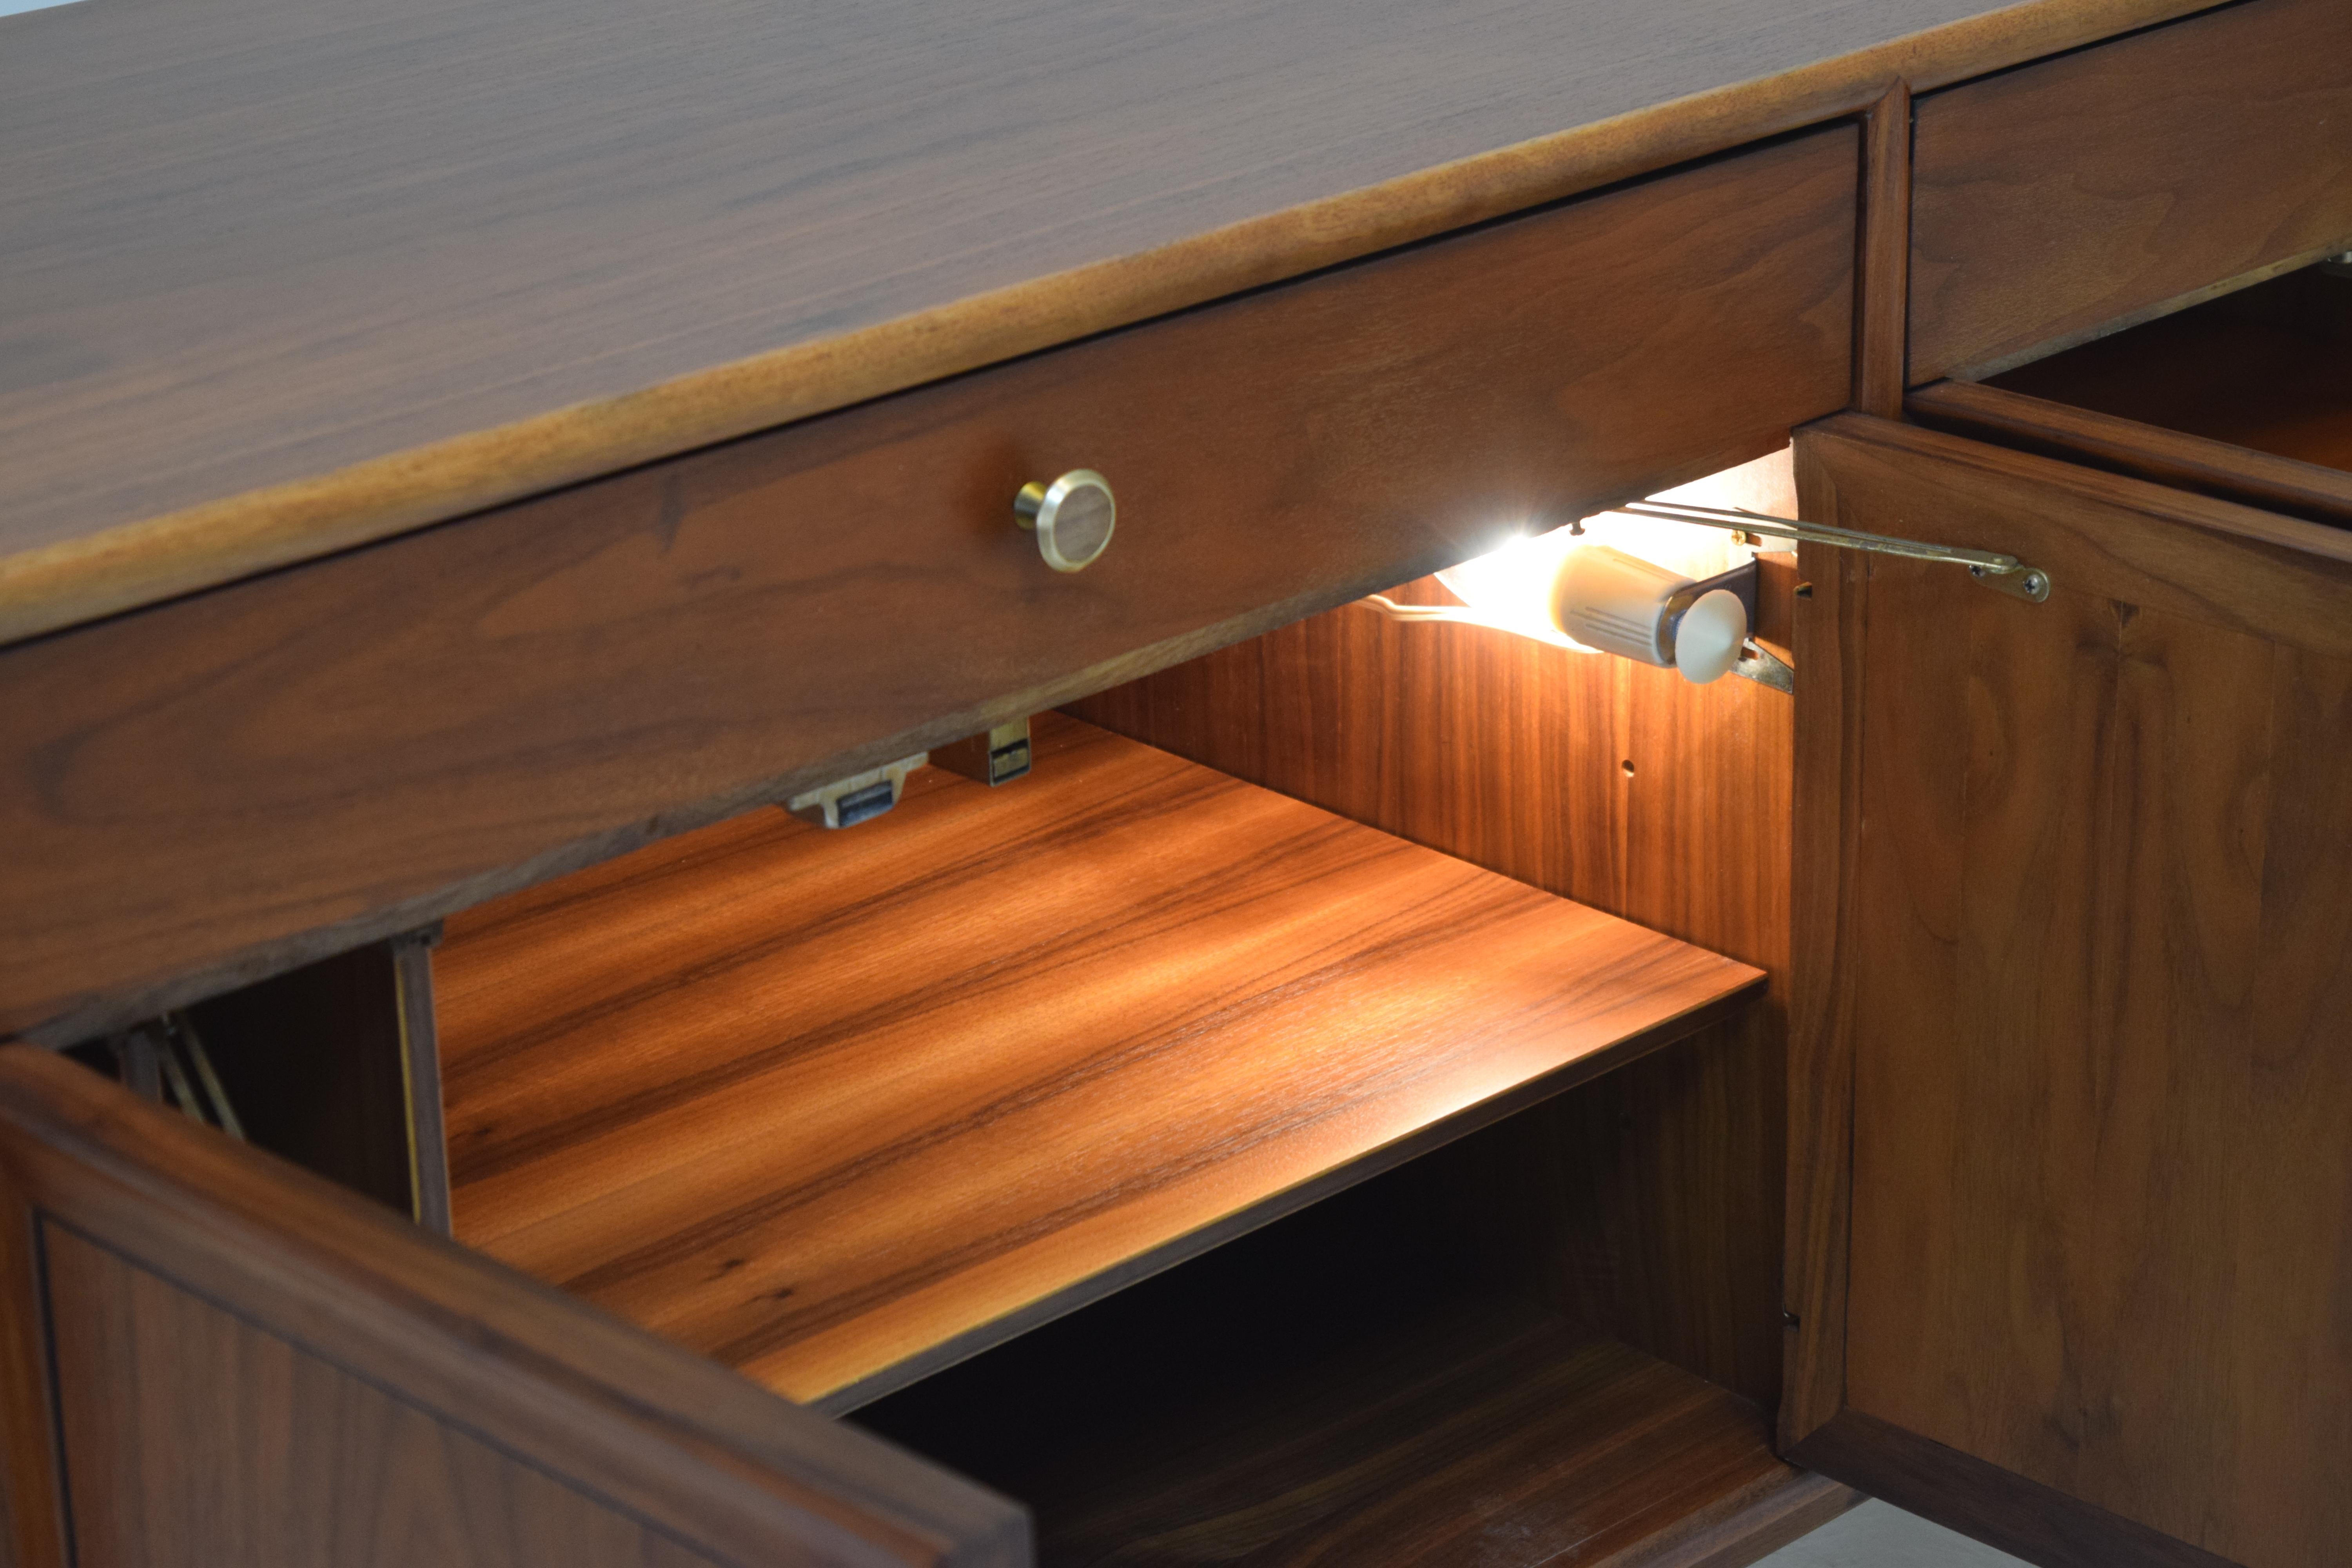 The case of this cabinet has been refinished with a specialized lacquer (Krystal by M.L. Campbells) that provides unprecedented protection from abrasion, hold and cold water and even alcohol. Measures: 60